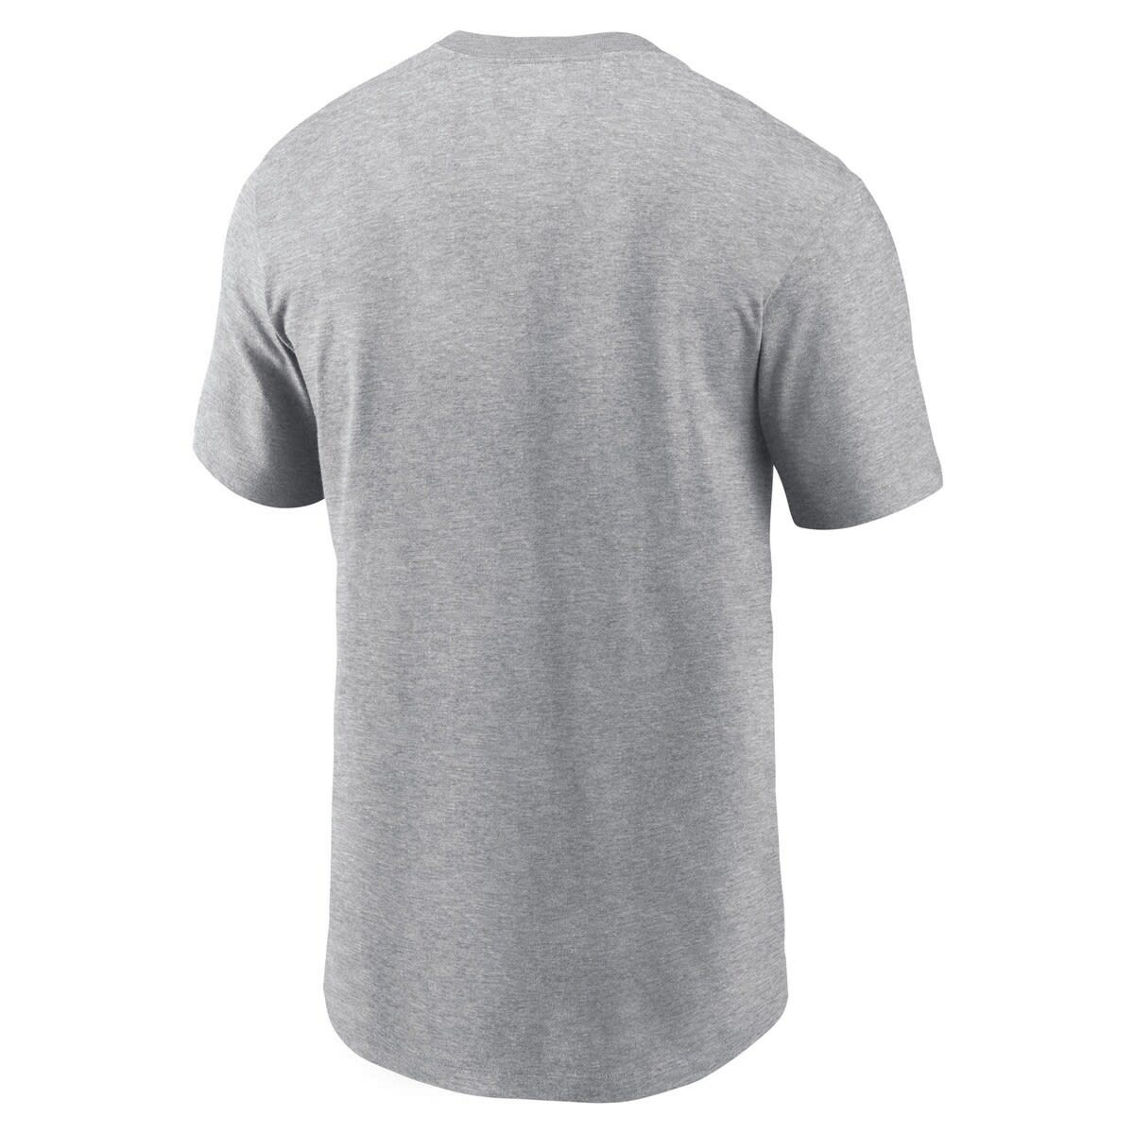 Nike Men's Heather Gray Texas Rangers Home Team Athletic Arch T-Shirt - Image 4 of 4